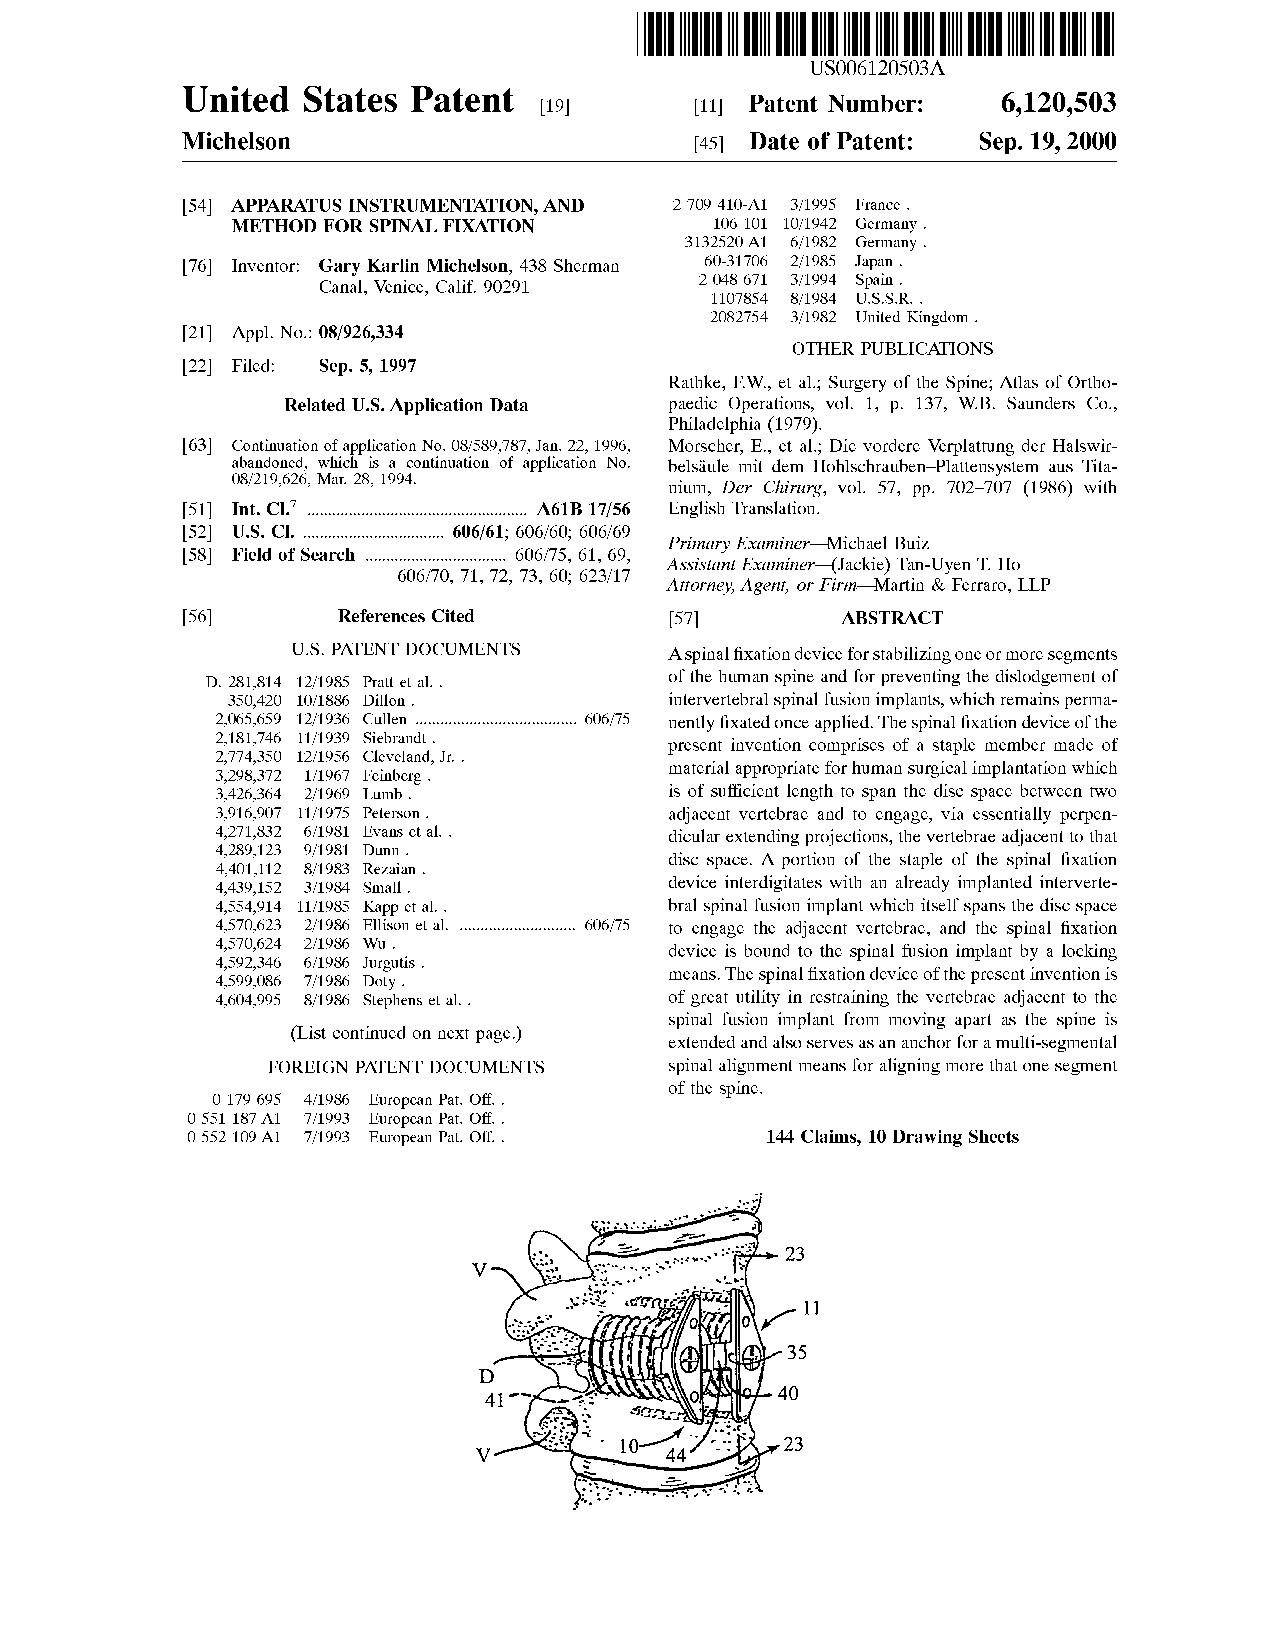 Apparatus instrumentation, and method for spinal fixation - Patent 6,120,503